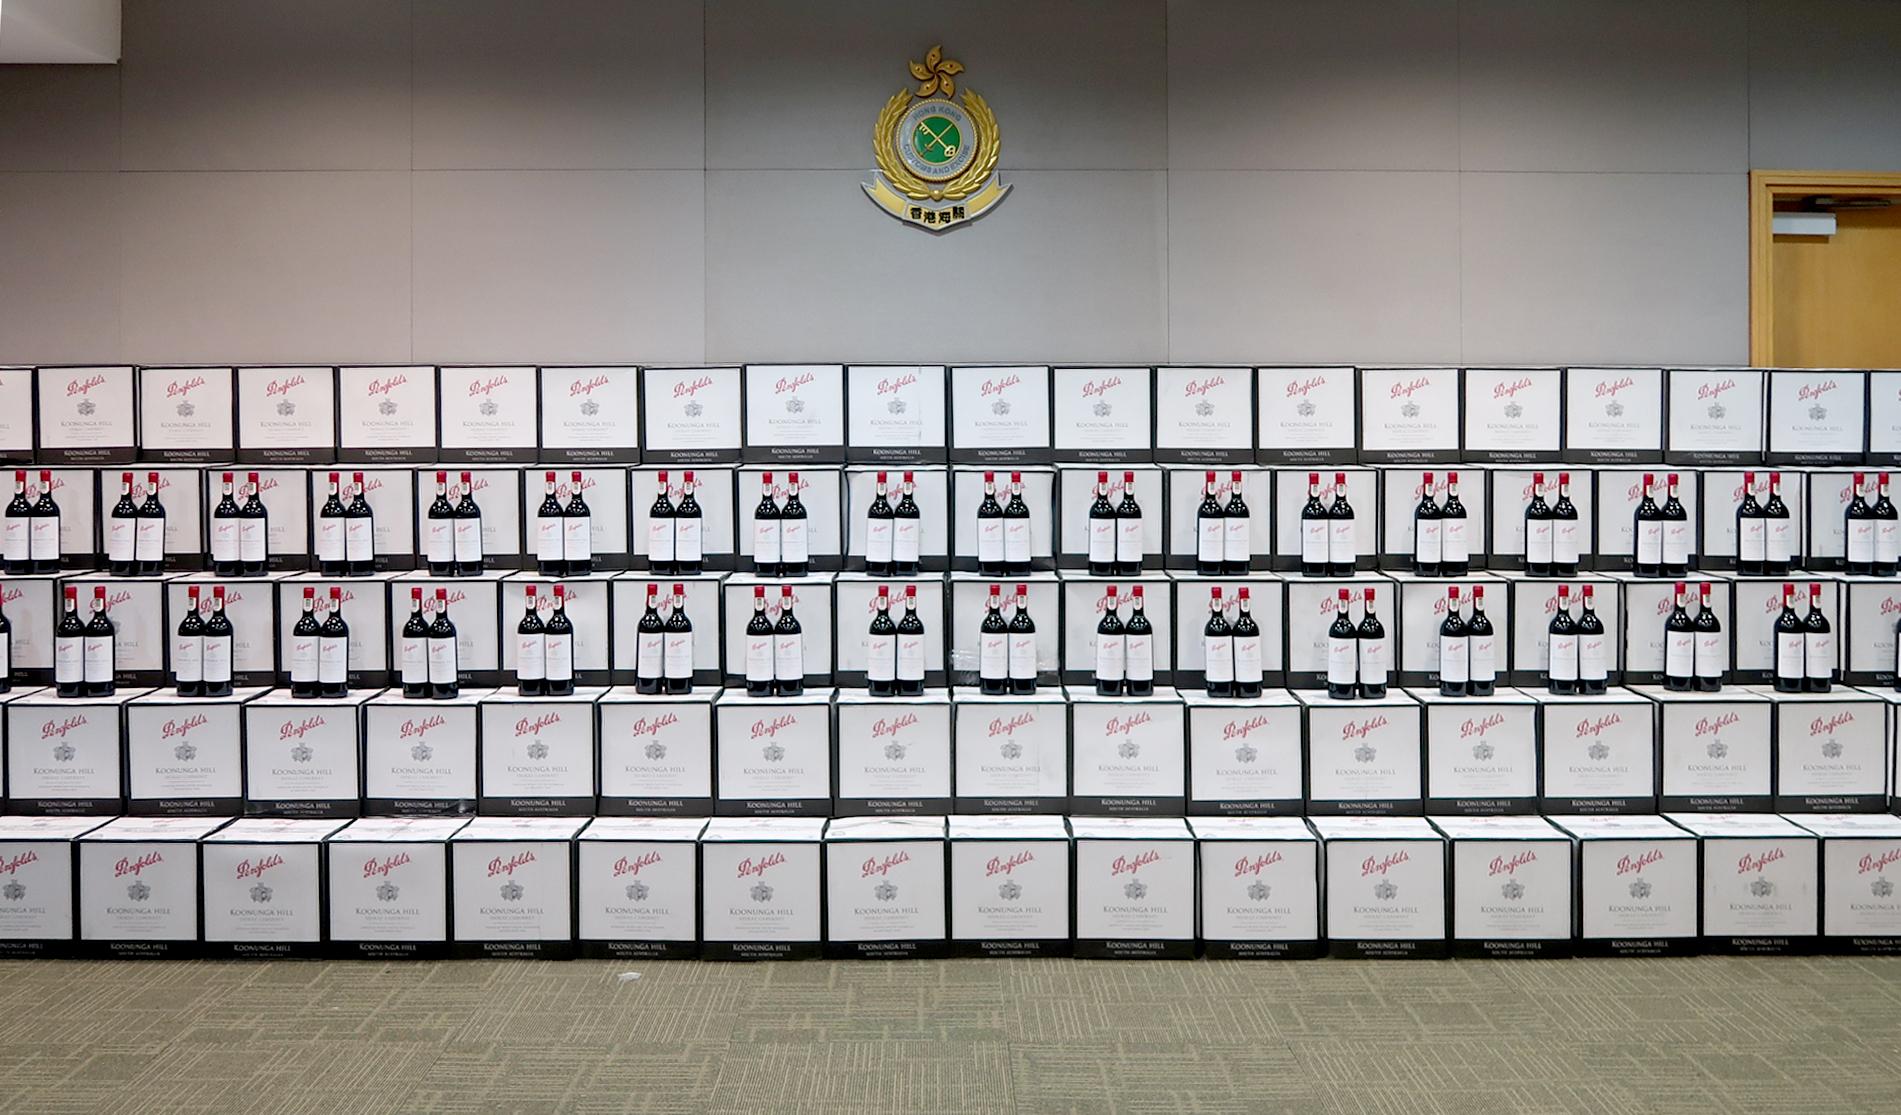 Hong Kong Customs and Macao Customs mounted a joint enforcement operation in June this year to vigorously combat sea smuggling activities through intelligence exchanges between the two places. During the operation, the two Customs administrations seized smuggled goods, including expensive food ingredients, red wine, electronic products and cash, with a total estimated market value of over $110 million. Photo shows some of the suspected smuggled red wine seized by Hong Kong Customs.